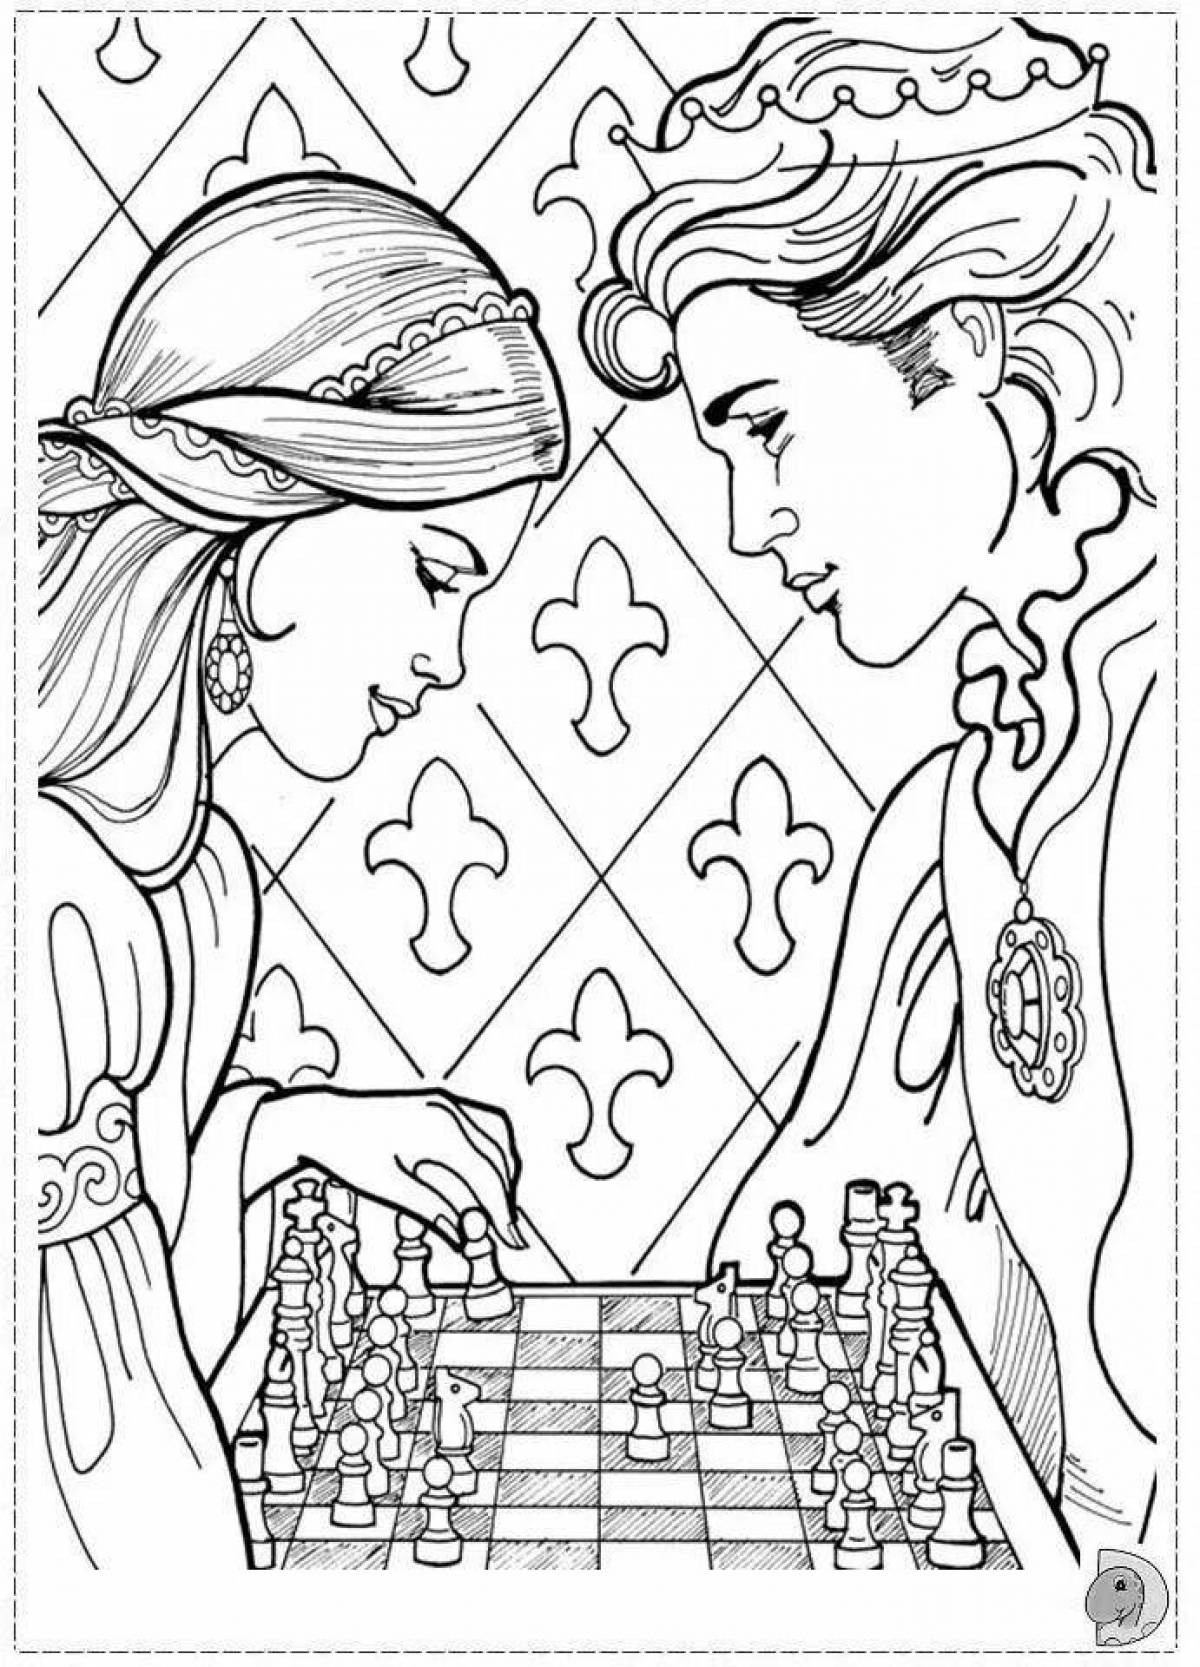 Colorful chess coloring book for kids to compete